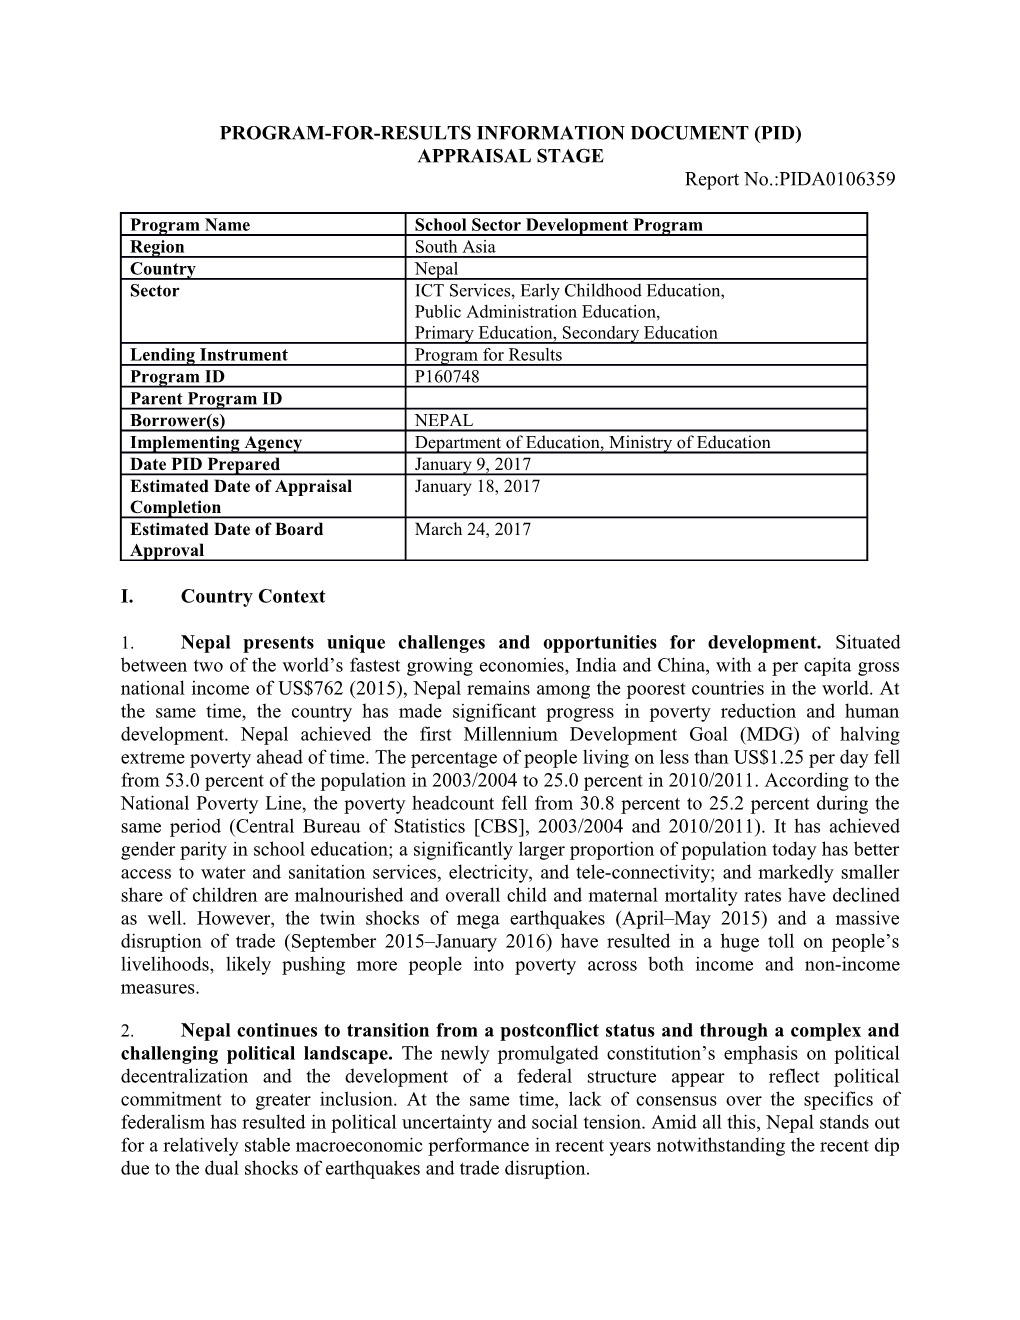 Program-For-Results Information Document (Pid)